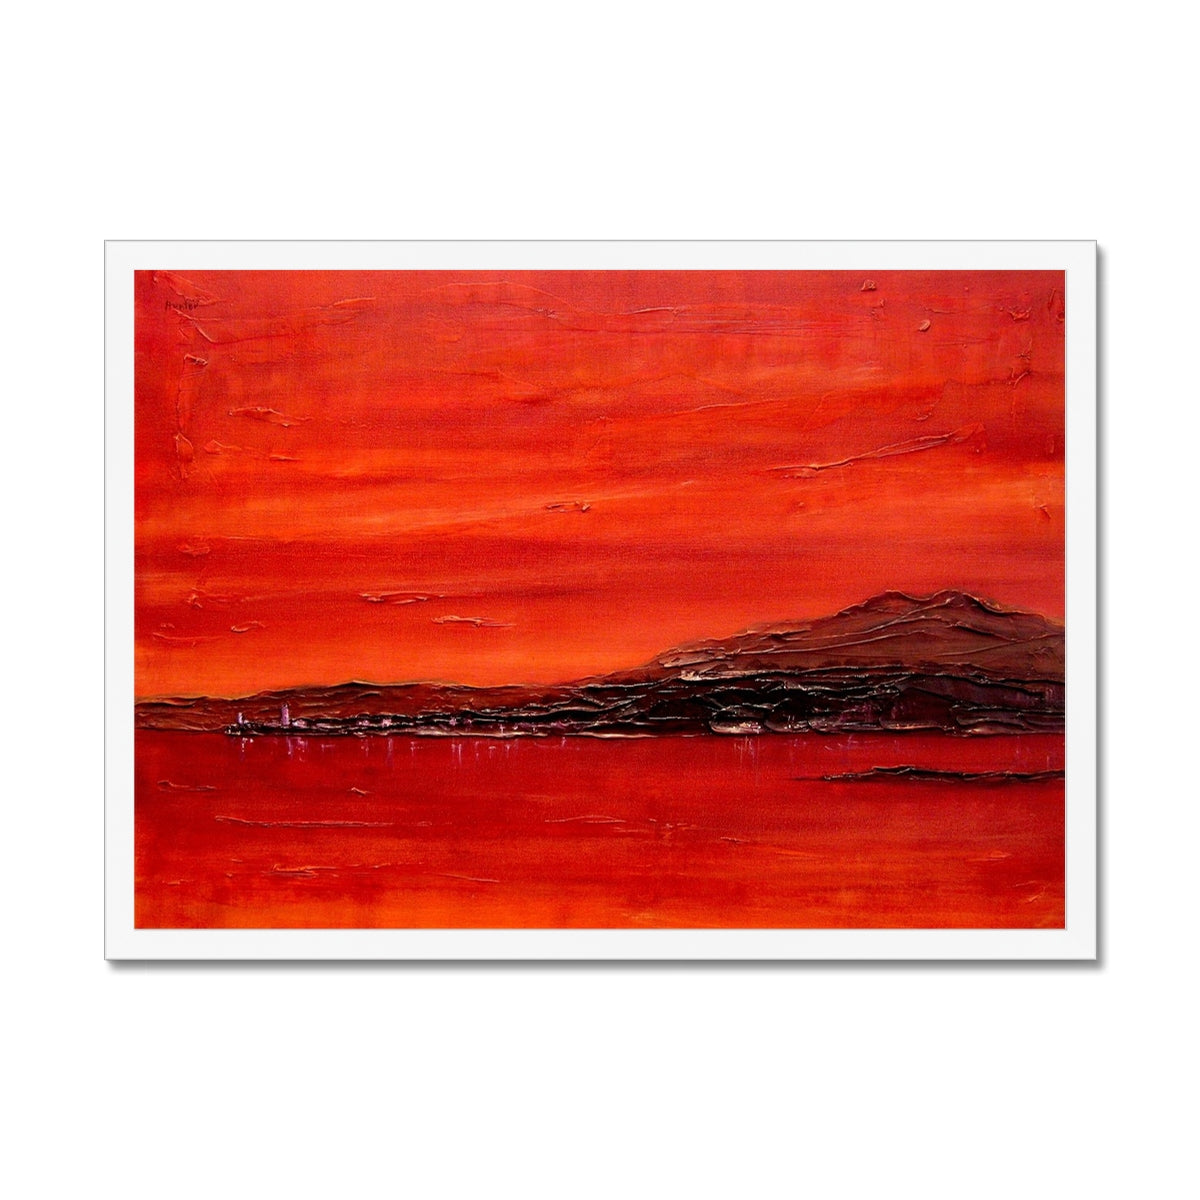 Toward Point Lighthouse Sunset Painting | Framed Prints From Scotland-Framed Prints-Arran Art Gallery-A2 Landscape-White Frame-Paintings, Prints, Homeware, Art Gifts From Scotland By Scottish Artist Kevin Hunter